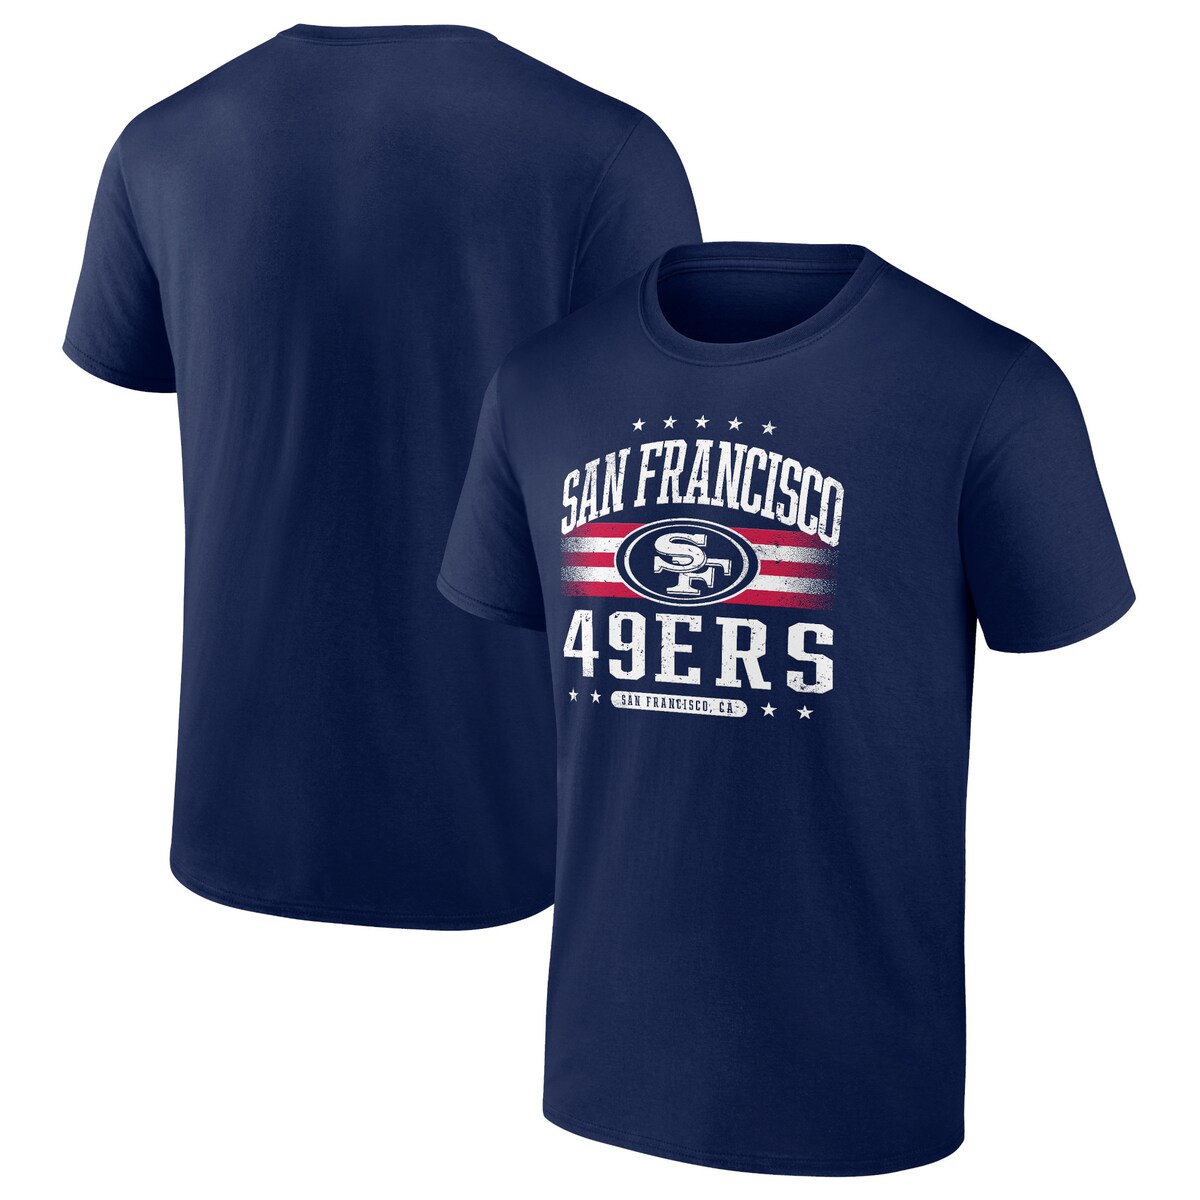 Illustrate your pride for the USA and the San Francisco 49ers when you wear this Americana T-shirt. Made by Fanatics Branded, it features team graphics in a patriotic-inspired design. Cotton fabric gives this San Francisco 49ers tee a comfortable feel and traditional look.Brand: Fanatics BrandedMachine wash, tumble dry lowImportedOfficially licensedShort sleeveDistressed screen print graphicsMaterial: 100% CottonCrew neck